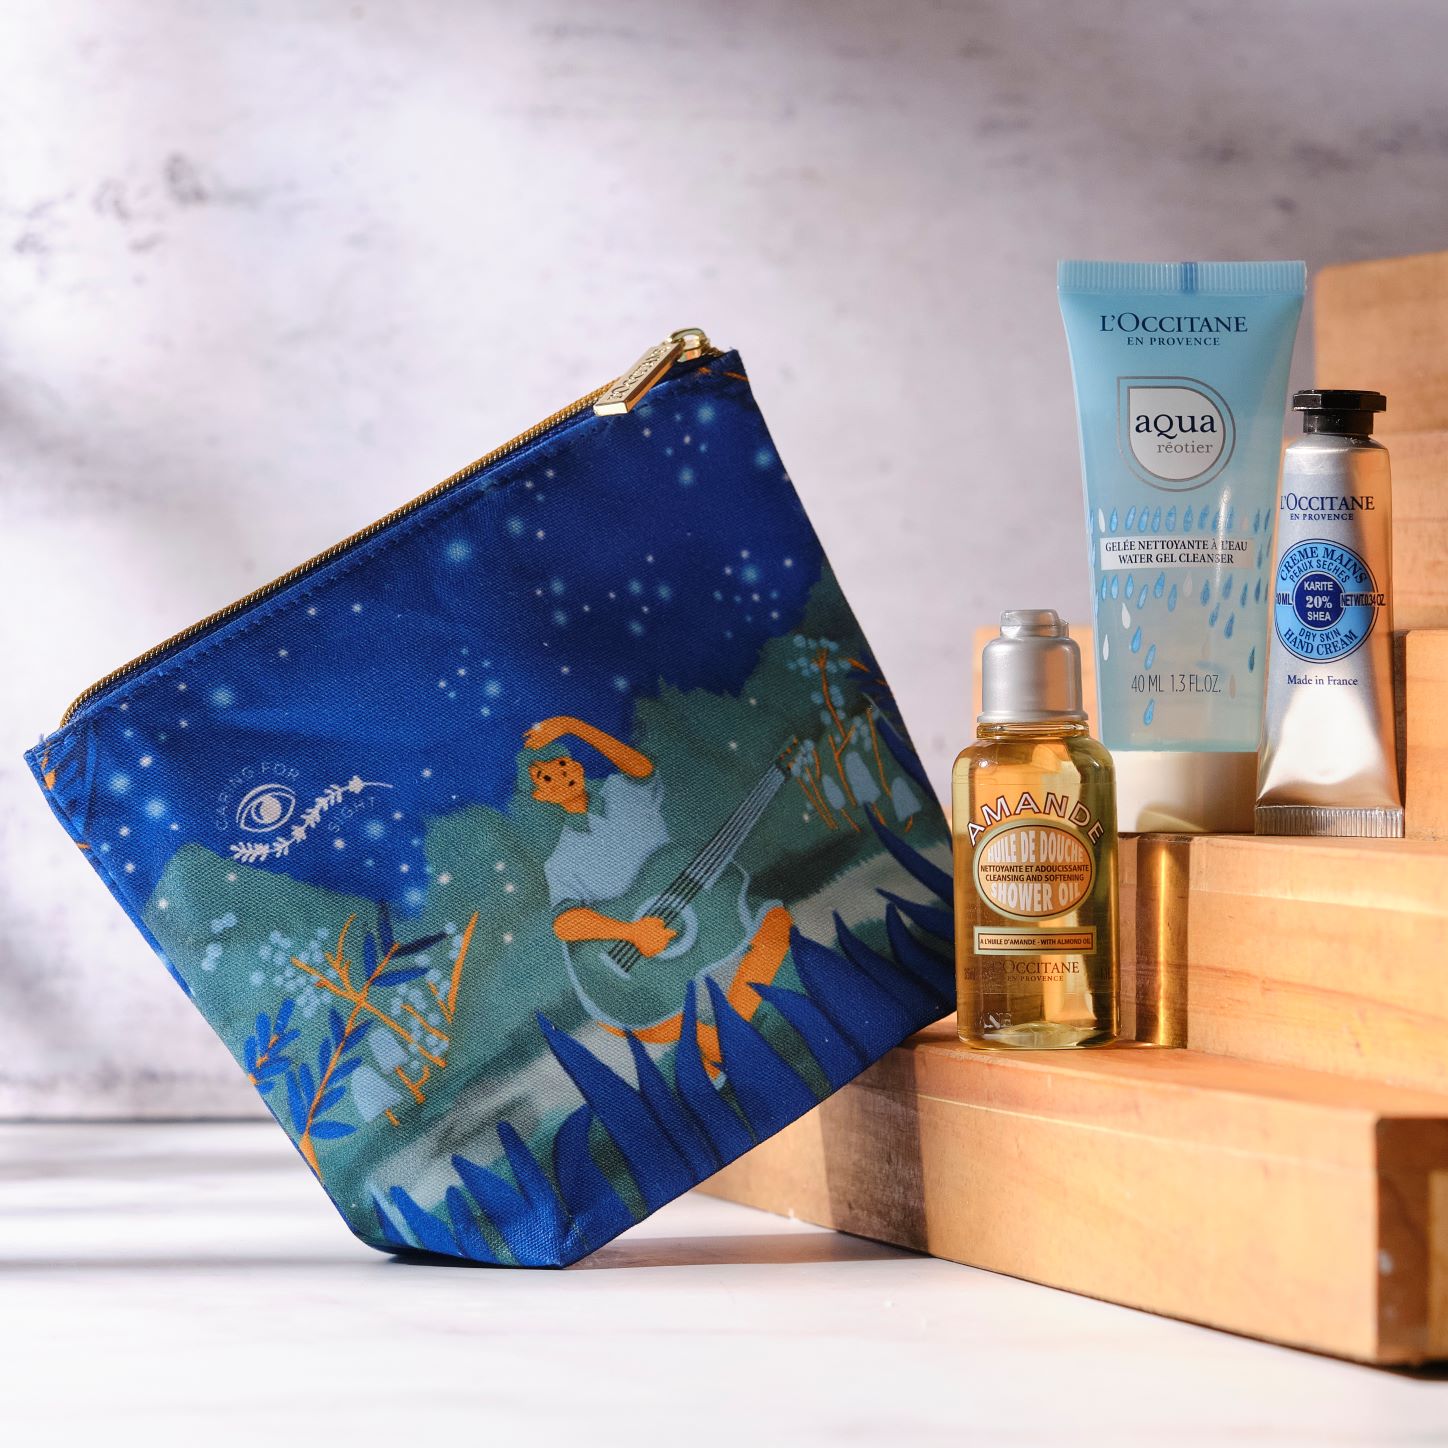 Loccitane Caring For Sight Charity Kit Product